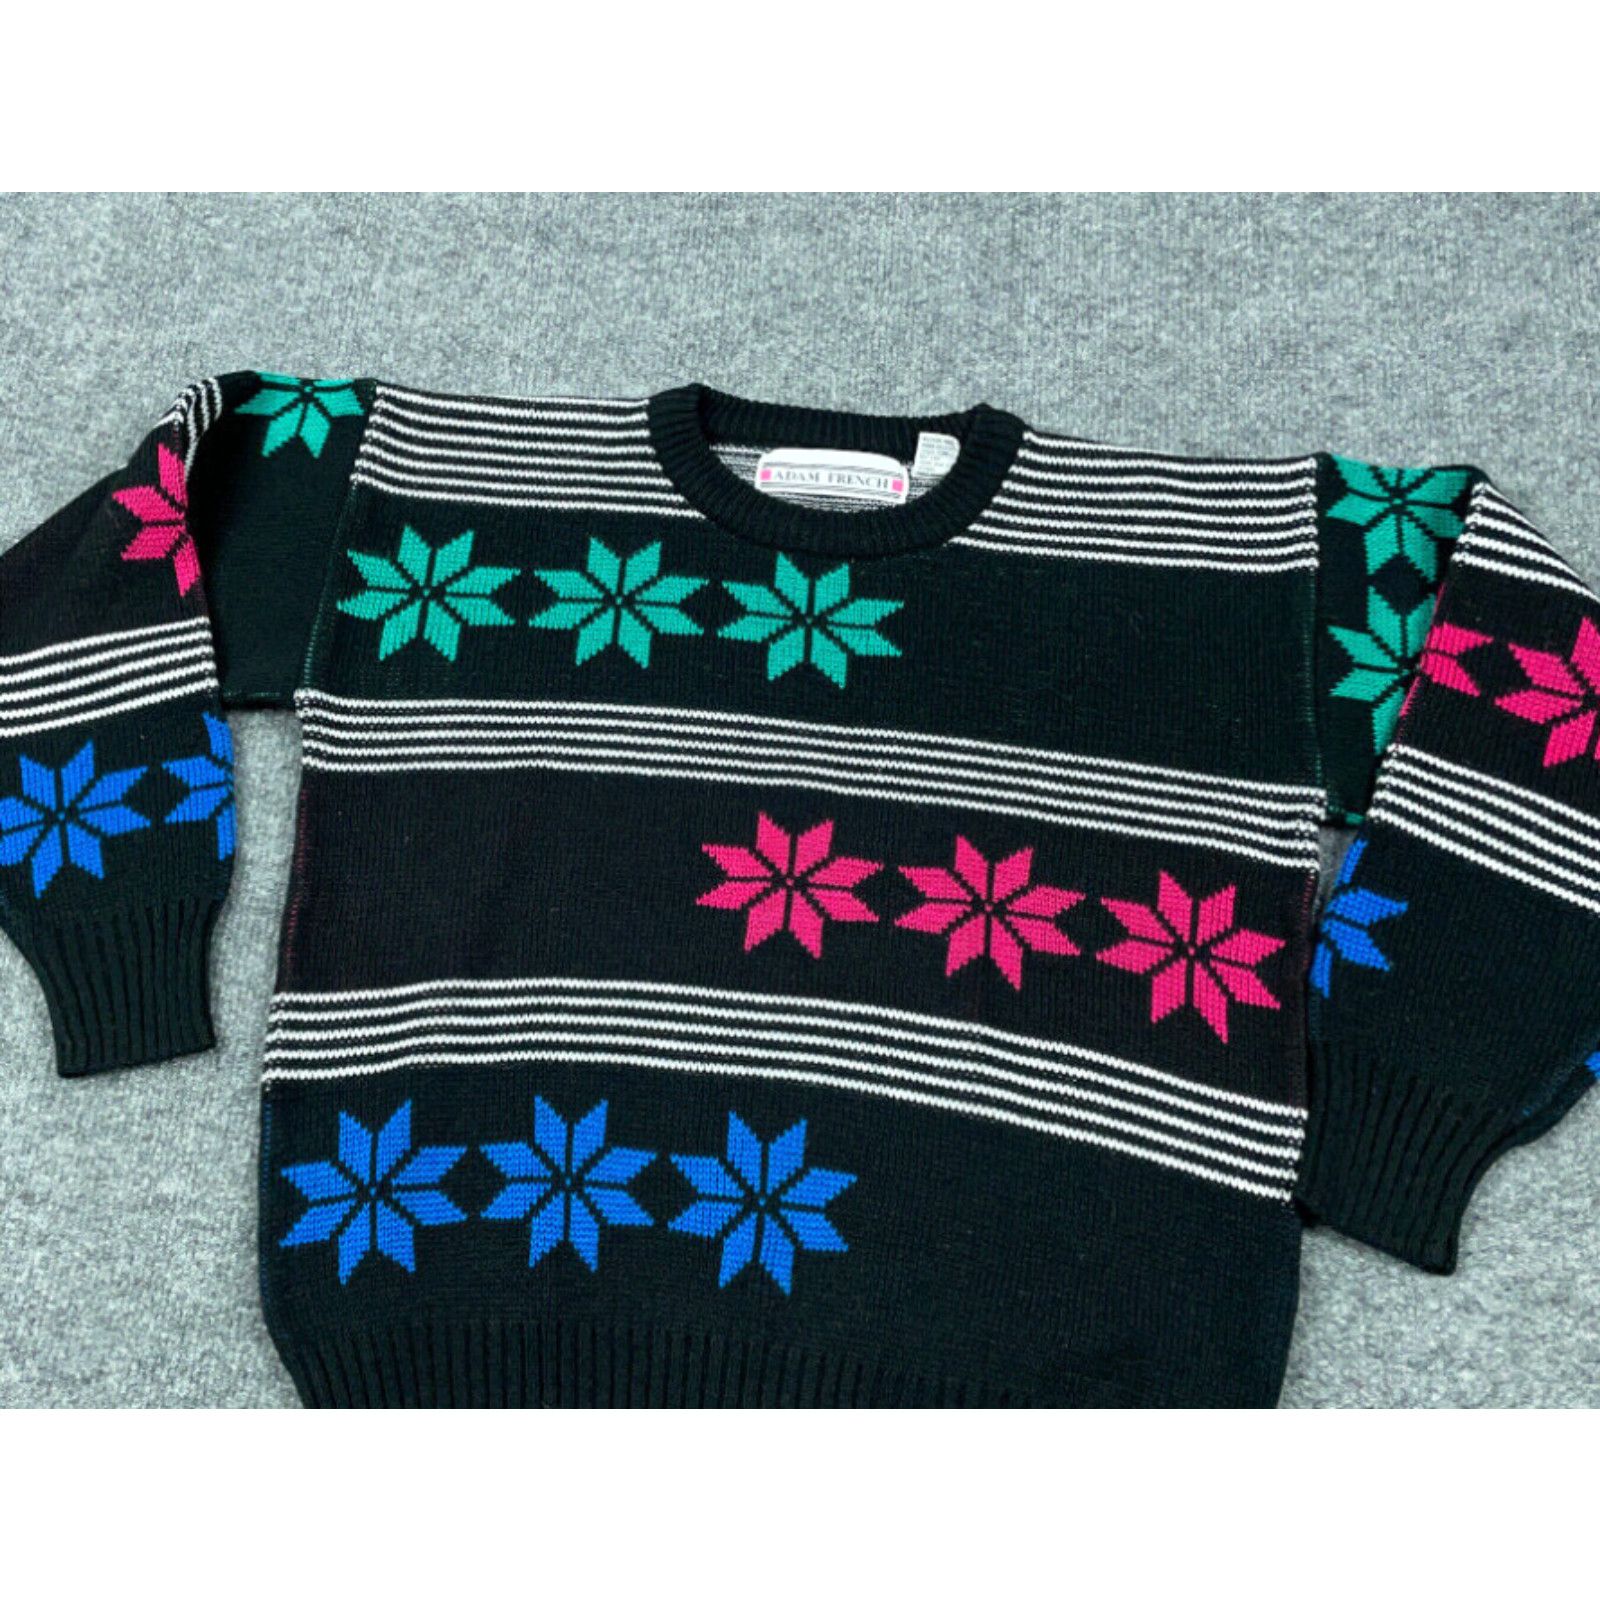 Vintage VTG 80s Black Colorful Snowflake Pullover Sweater Adult Small Hipster Geometric Size US S / EU 44-46 / 1 - 3 Thumbnail